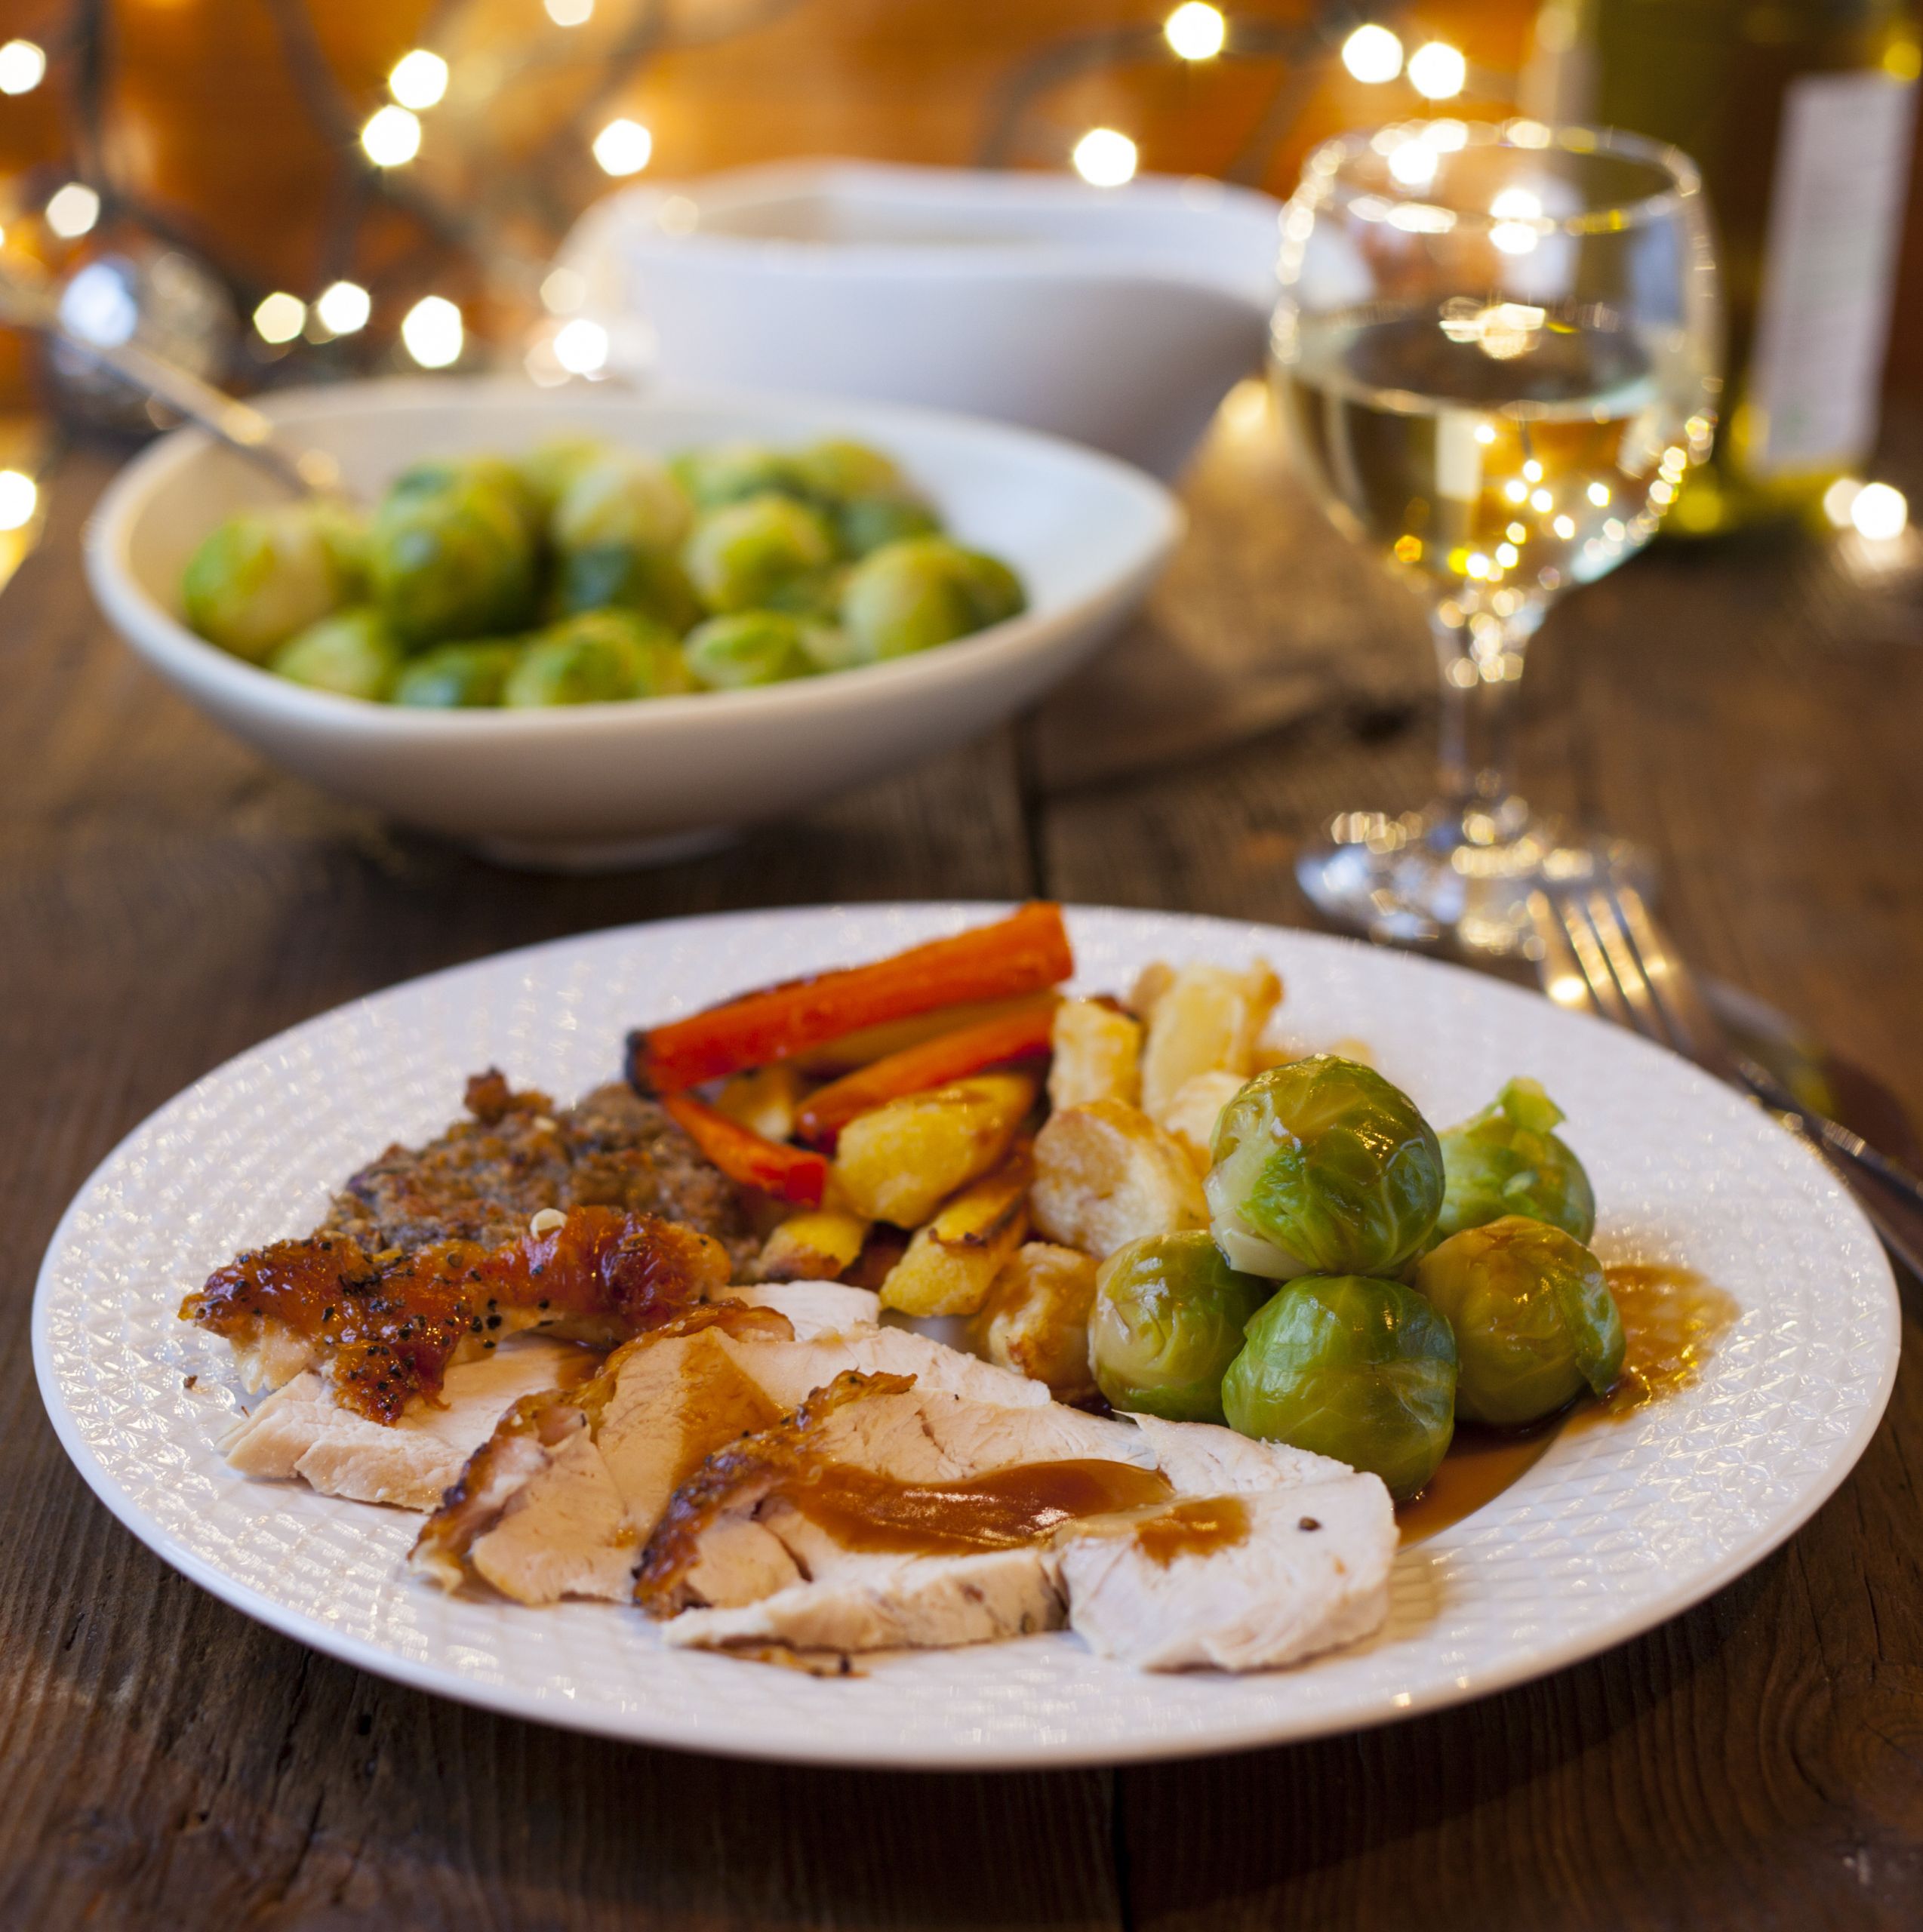 Recipes For Christmas Dinners
 Healthy recipes of the month Christmas dinner leftovers